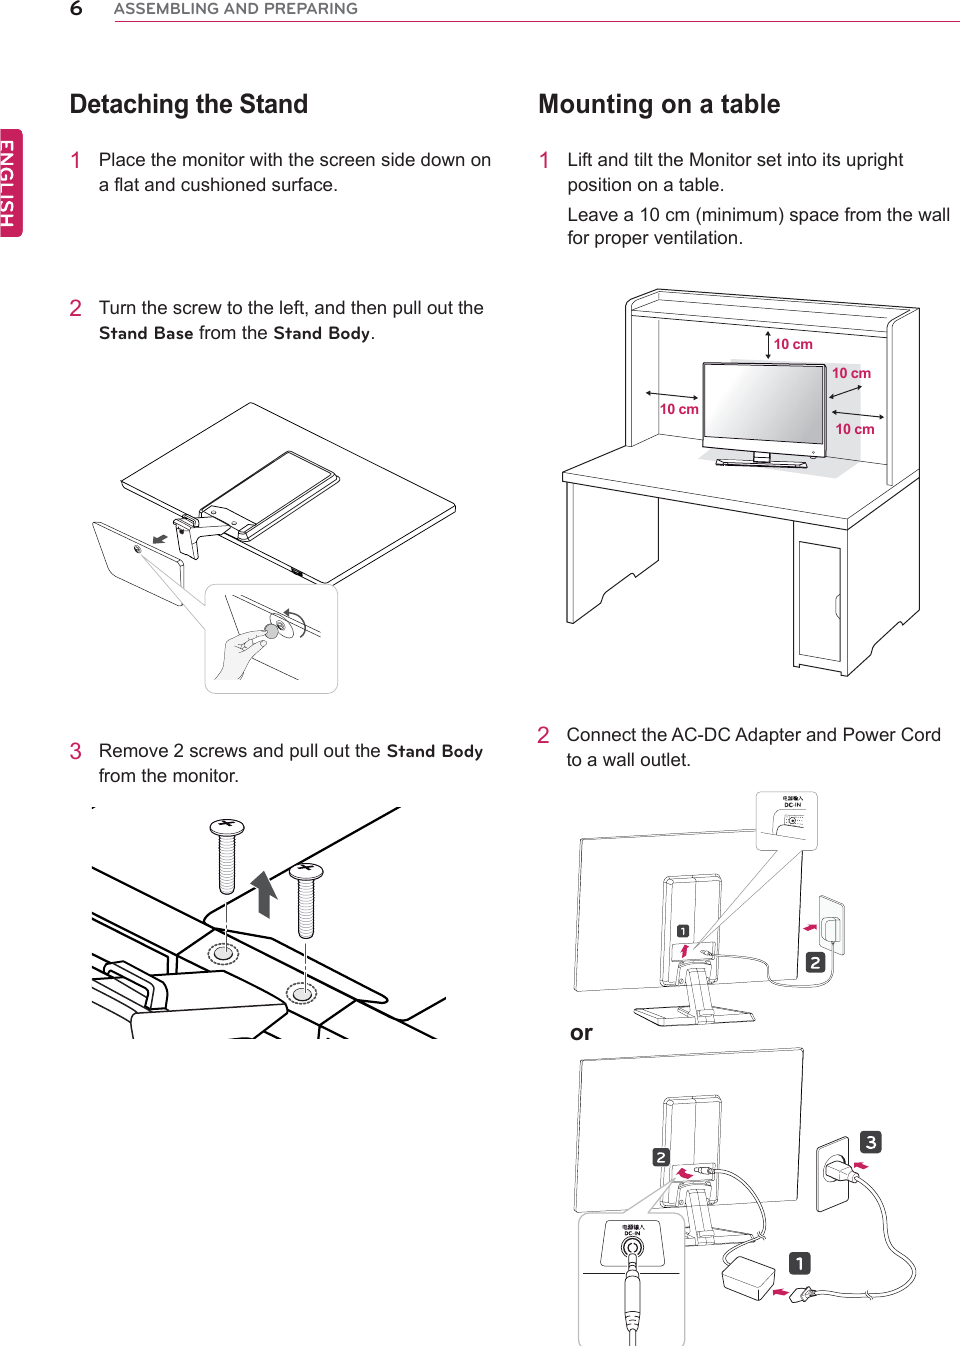 êßÍÍÛÓÞÔ×ÒÙ ßÒÜ ÐÎÛÐßÎ×ÒÙMounting on a table1 Lift and tilt the Monitor set into its upright position on a table.Leave a 10 cm (minimum) space from the wall for proper ventilation.2 Connect the AC-DC Adapter and Power Cord to a wall outlet.or 10 cm10 cm10 cm10 cm2 Turn the screw to the left, and then pull out the Í¬¿²¼ Þ¿-» from the Í¬¿²¼ Þ±¼§.Detaching the Stand1 Place the monitor with the screen side down on a flat and cushioned surface.3 Remove 2 screws and pull out the Í¬¿²¼ Þ±¼§ from the monitor.